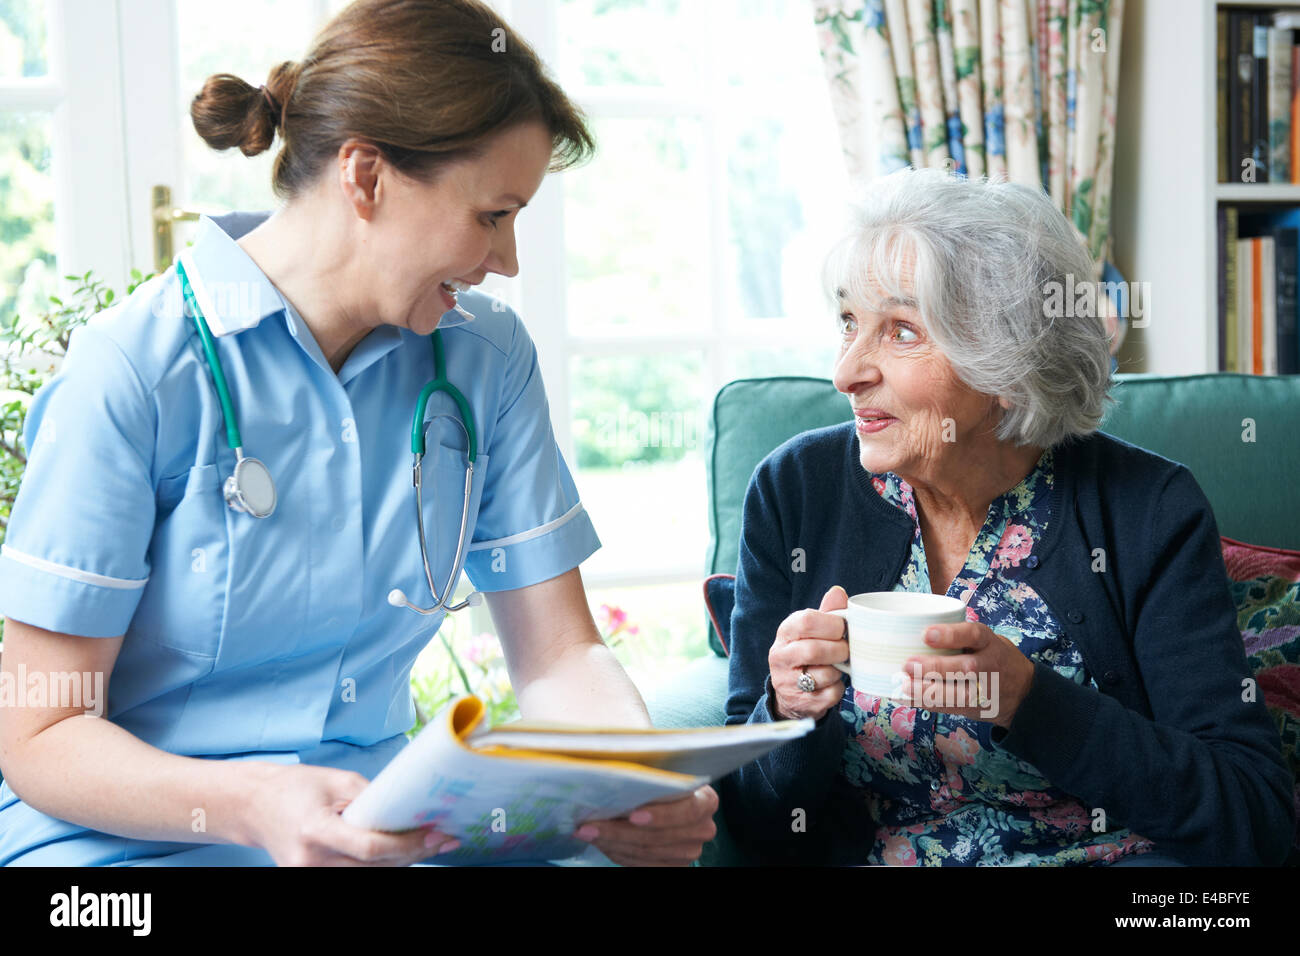 Health Care Worker Visiting Senior Woman At Home Stock Photo